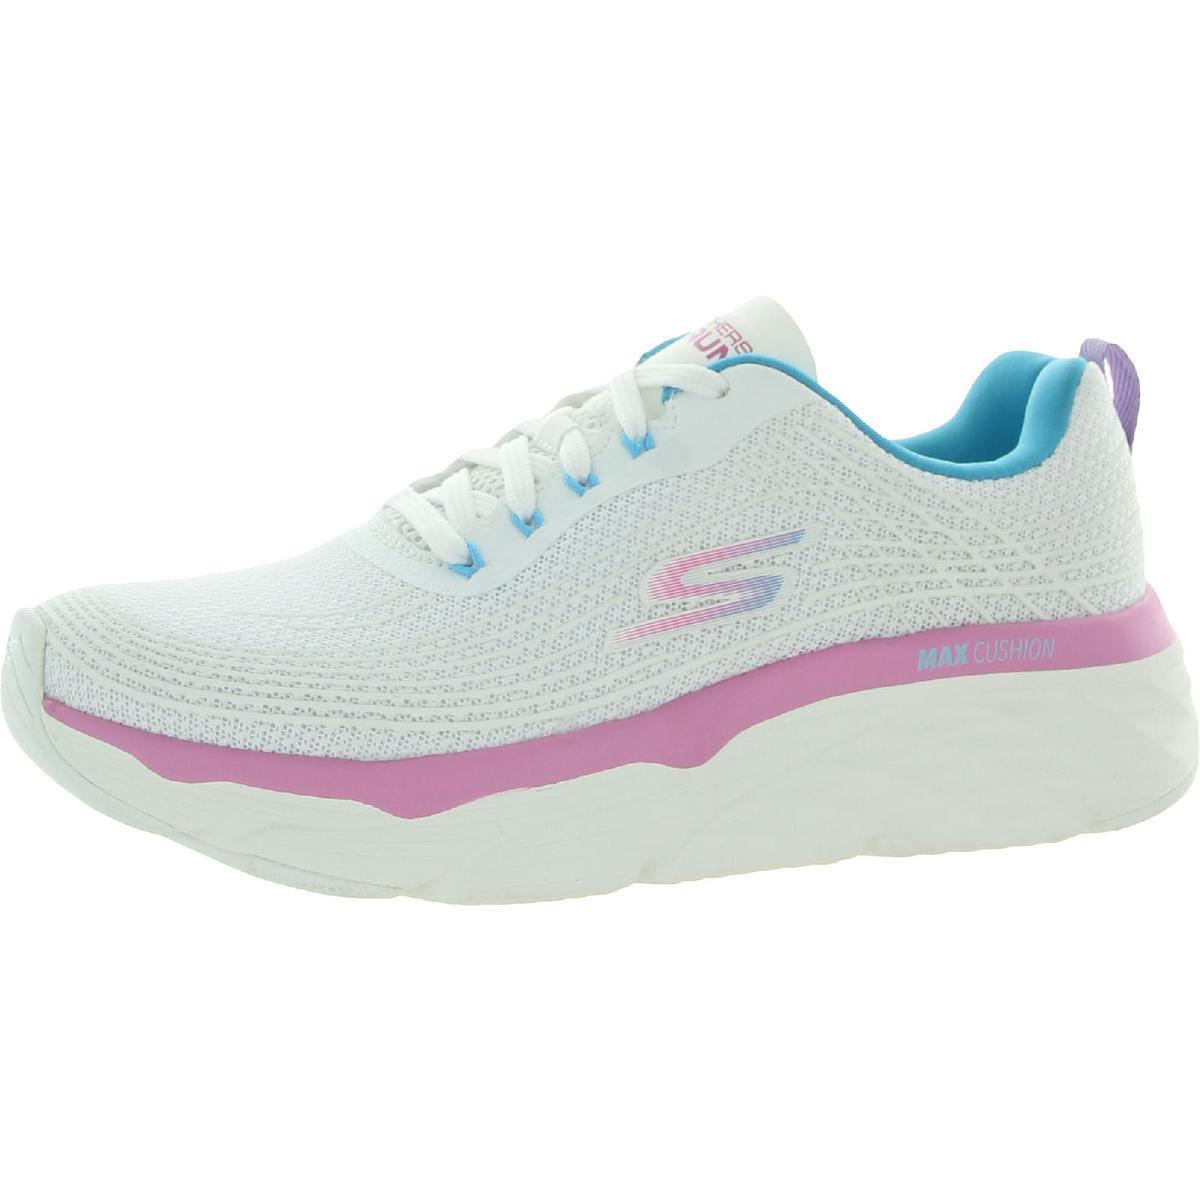 Skechers Womens Max Cushioning Elite Workout Running Shoes Sneakers Bhfo 6016 White/Pink